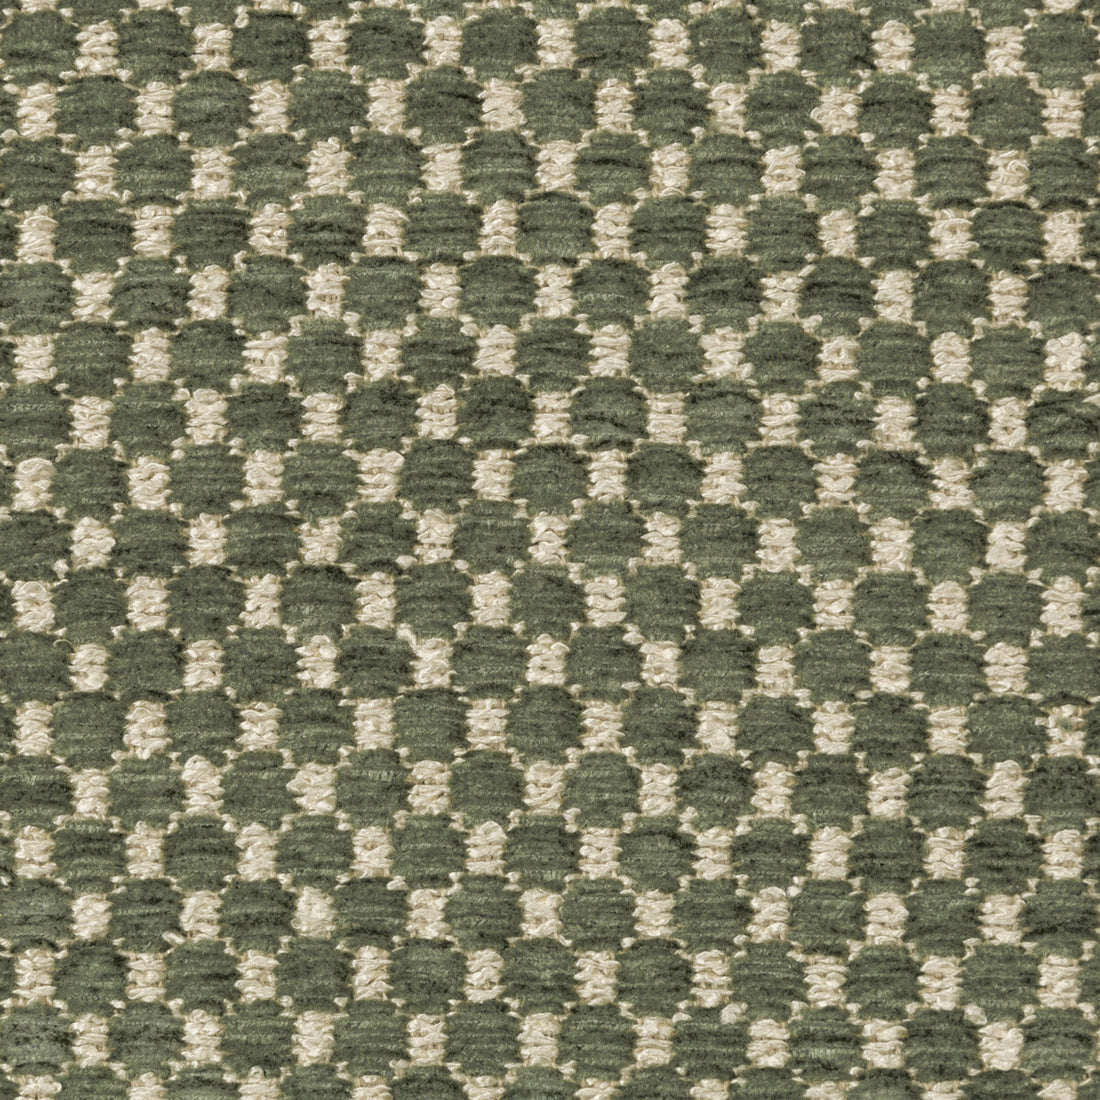 Ecrins Texture fabric in avocado color - pattern 8019147.33.0 - by Brunschwig &amp; Fils in the Chambery Textures II collection